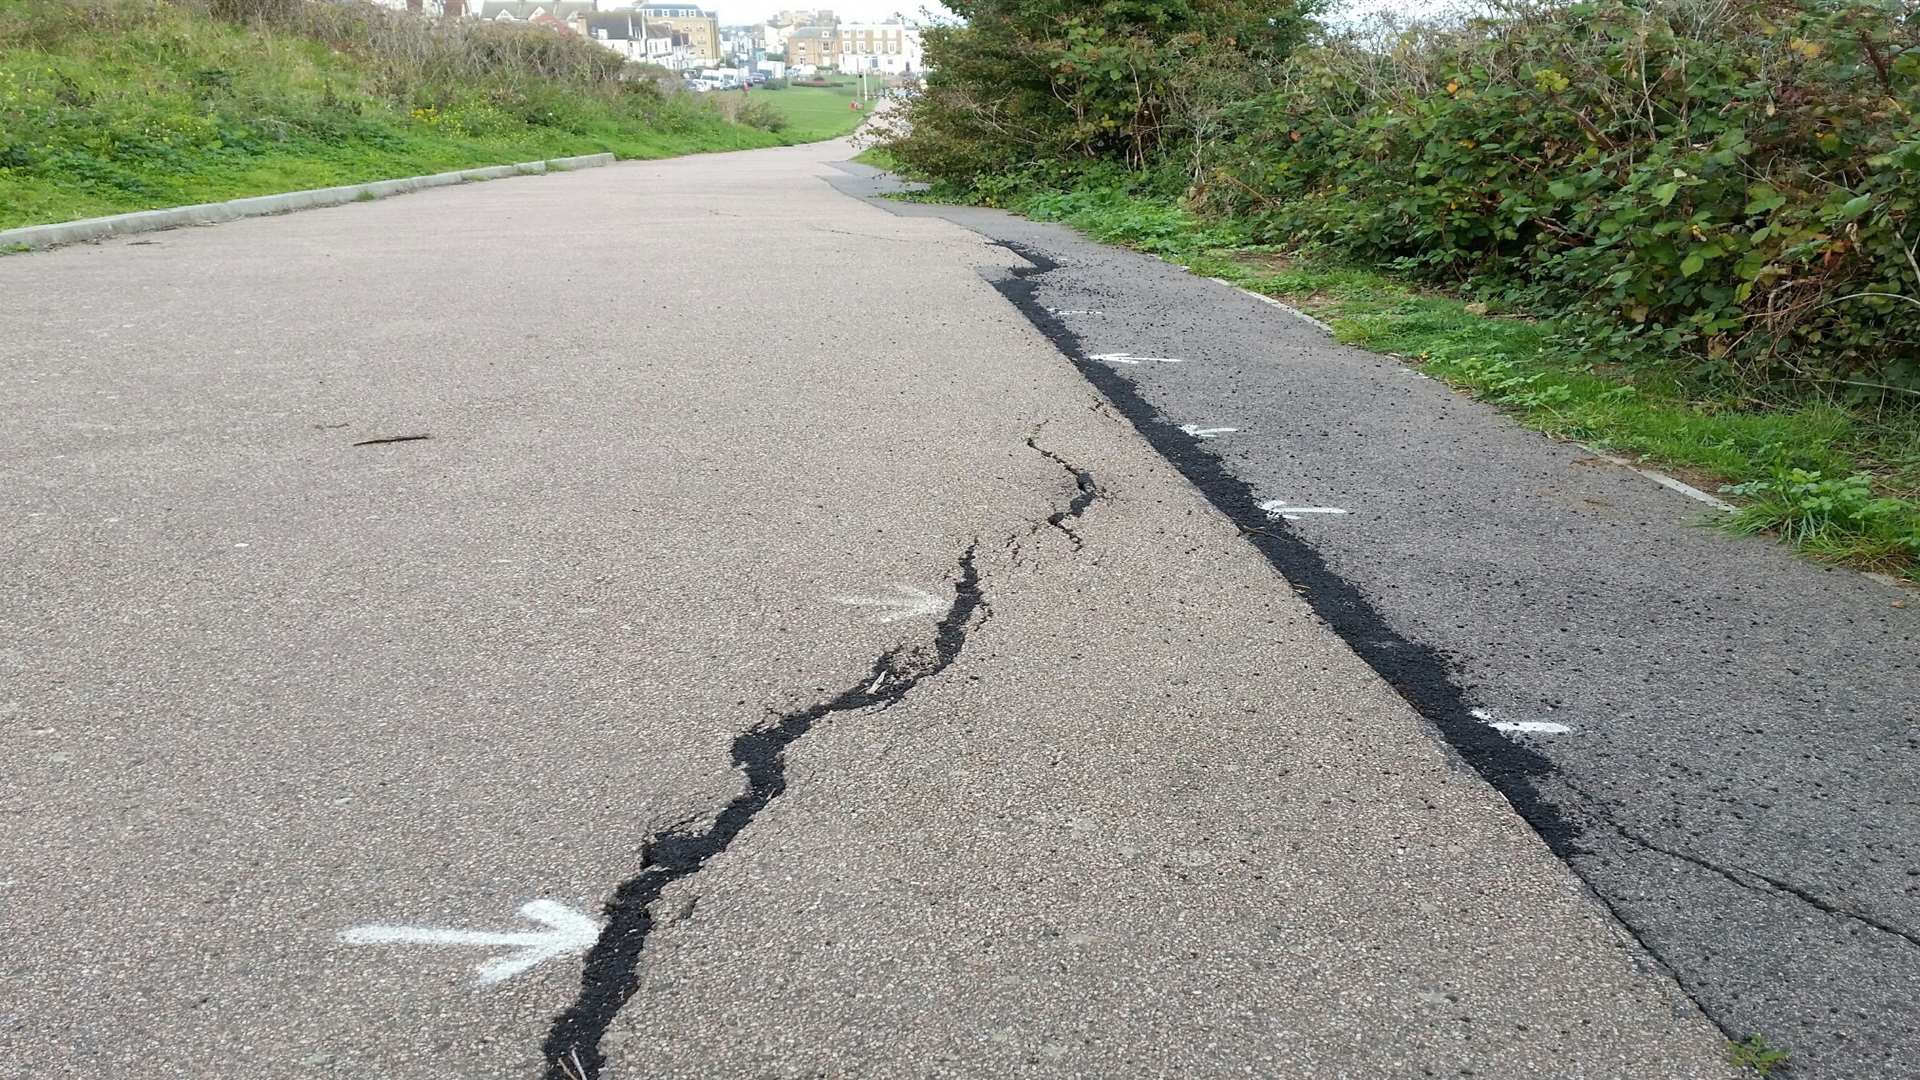 Cracks on the surface of The Downs pathway between Beltinge and Herne Bay